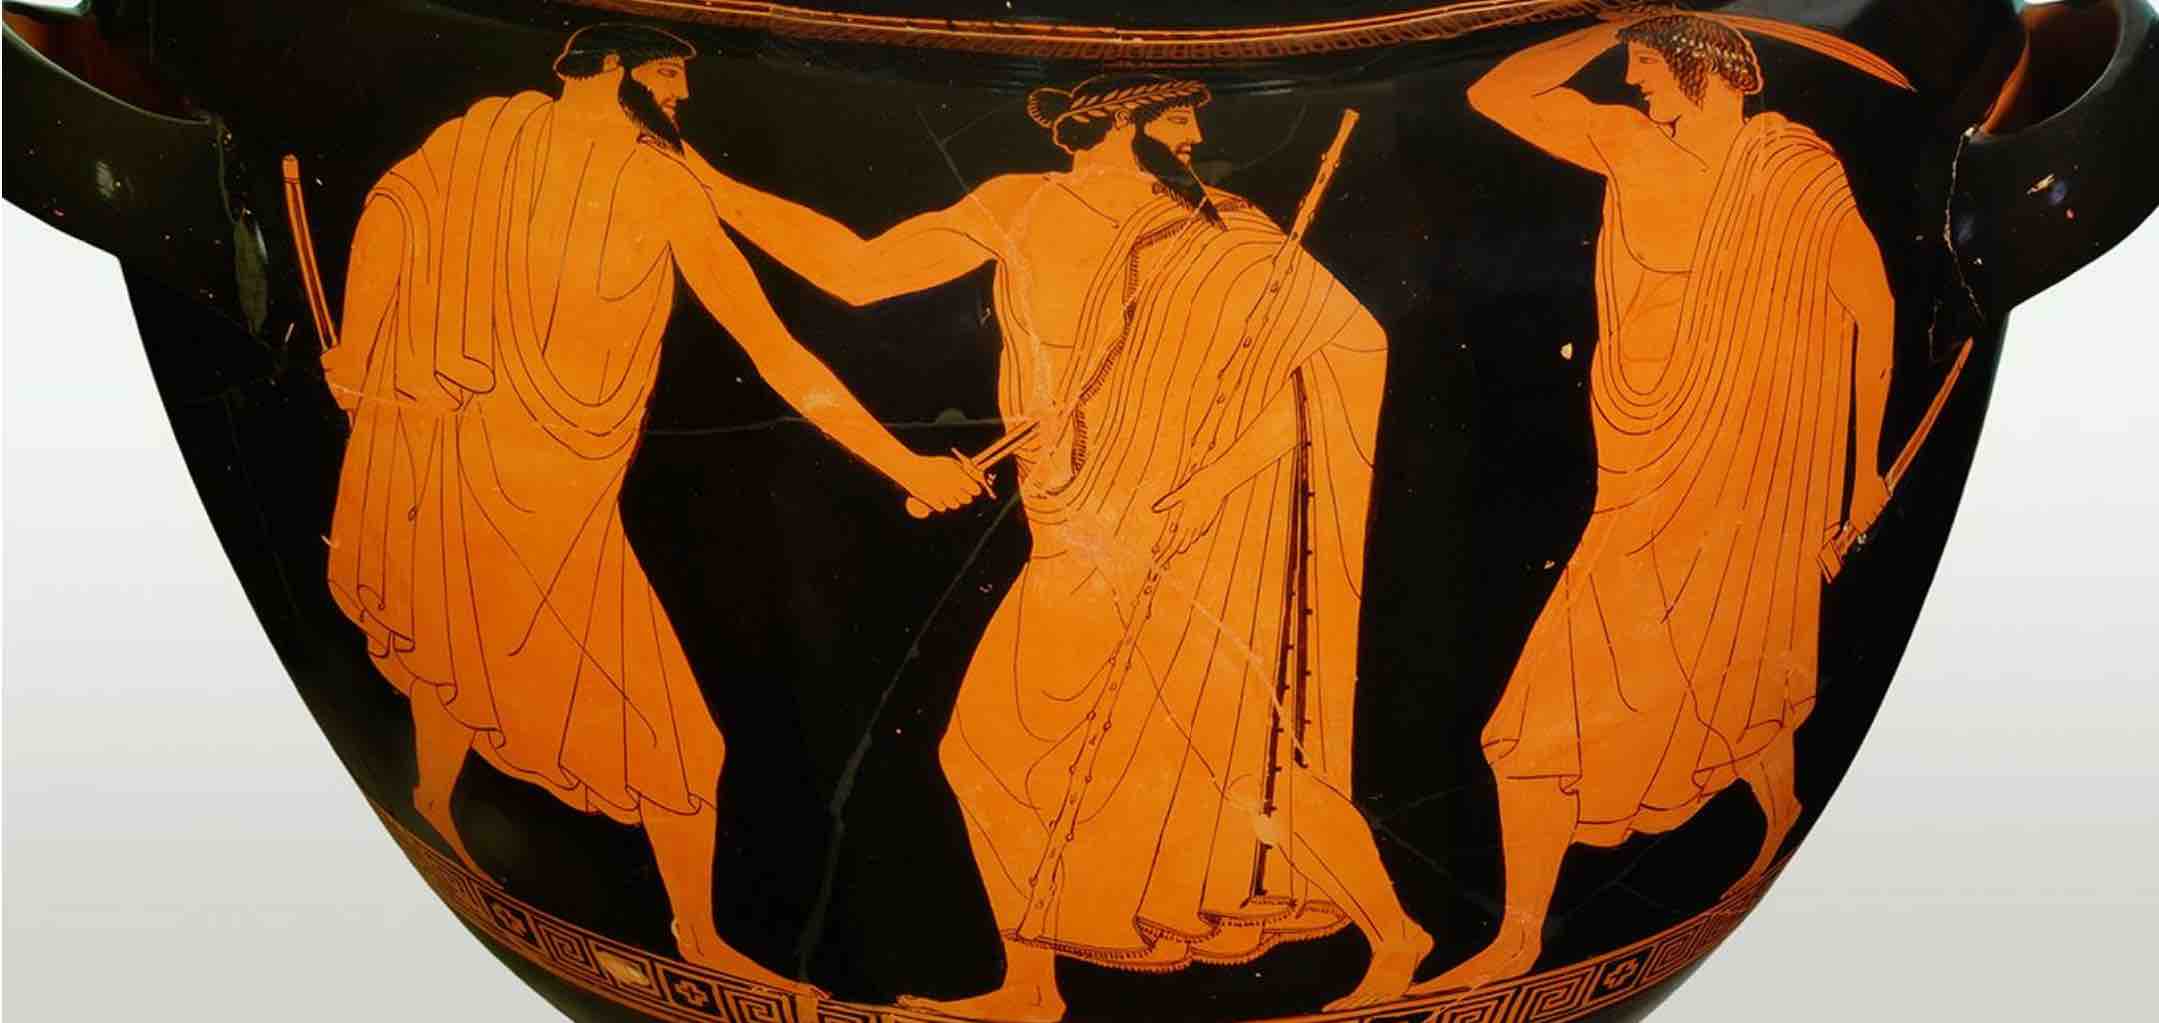 Death of Hipparchus at the hands of Harmodius and Aristogeiton. Syriskos Painter, Athens 475-460 BC. For Harmodius and Aristogetion, see https://en.wikipedia.org/wiki/Harmodius_and_Aristogeiton